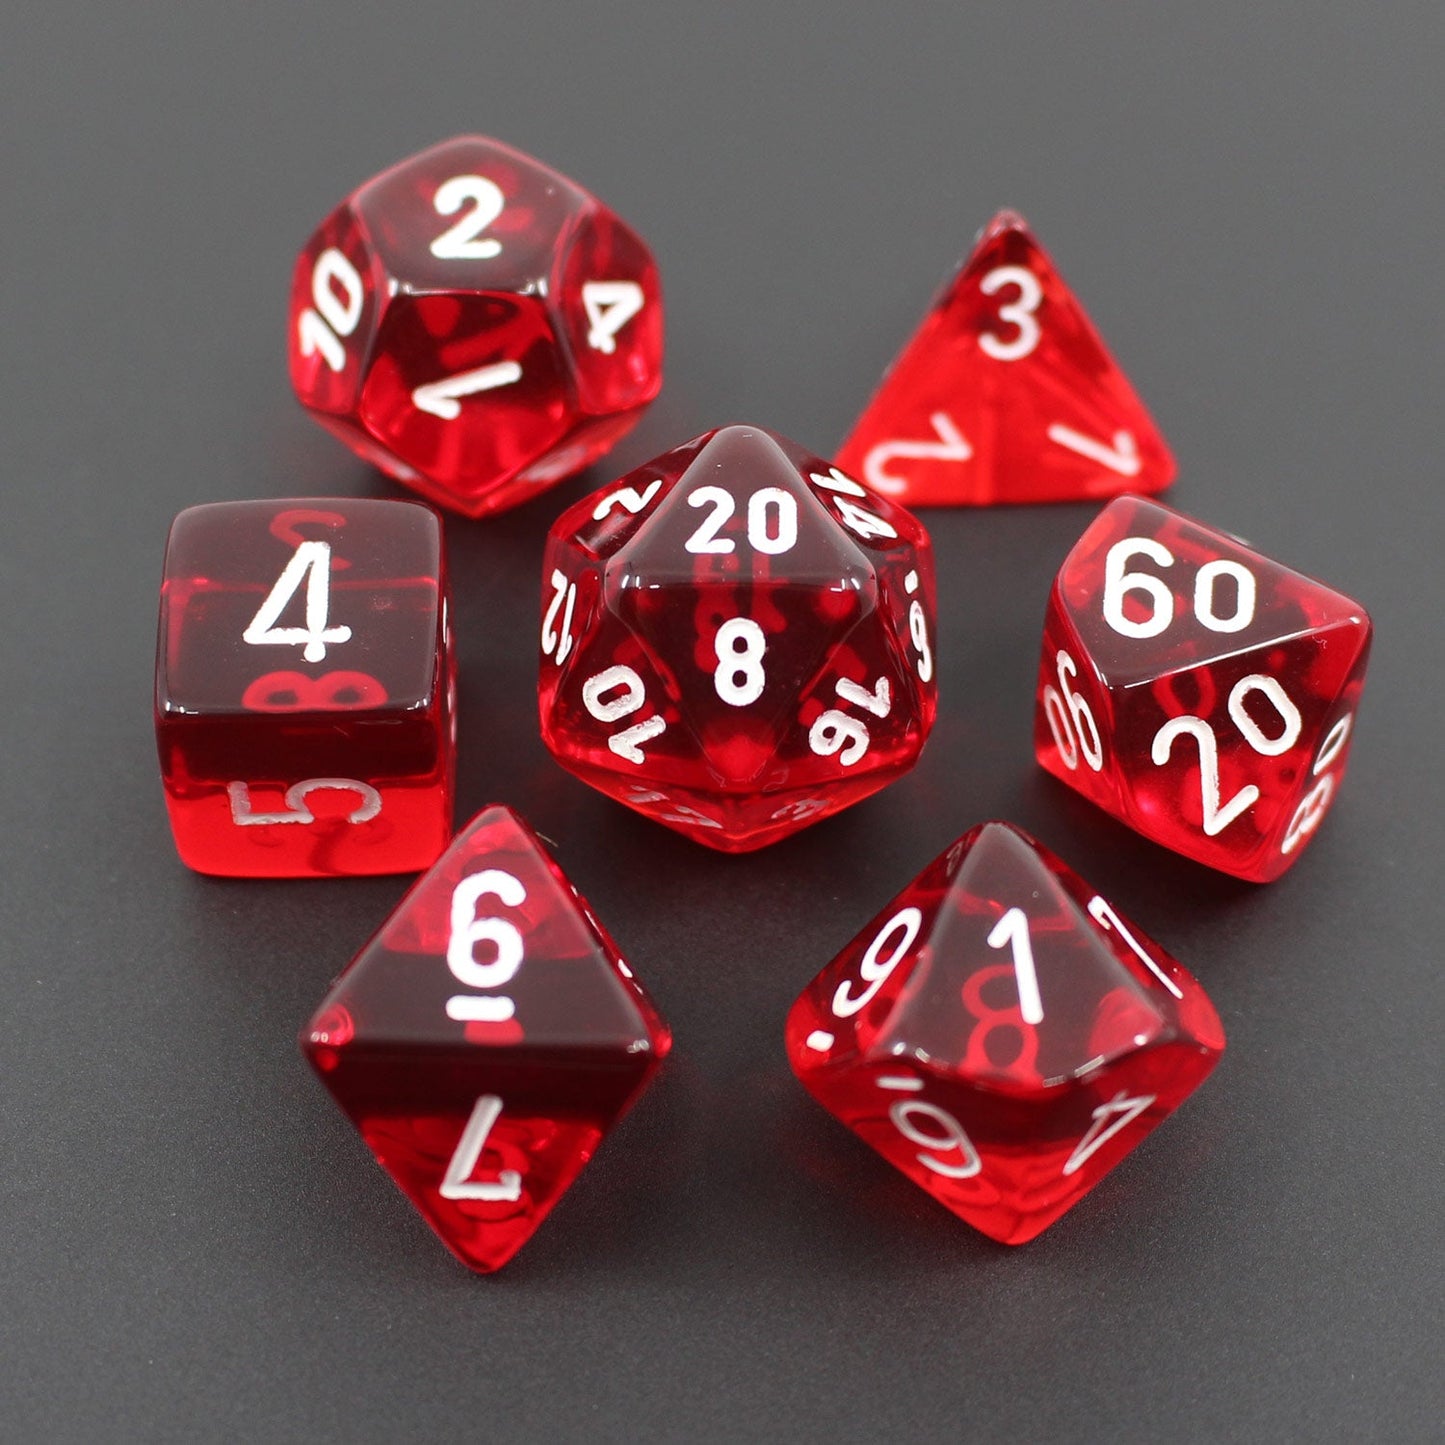 FREE Today: Red Translucent Dice Set